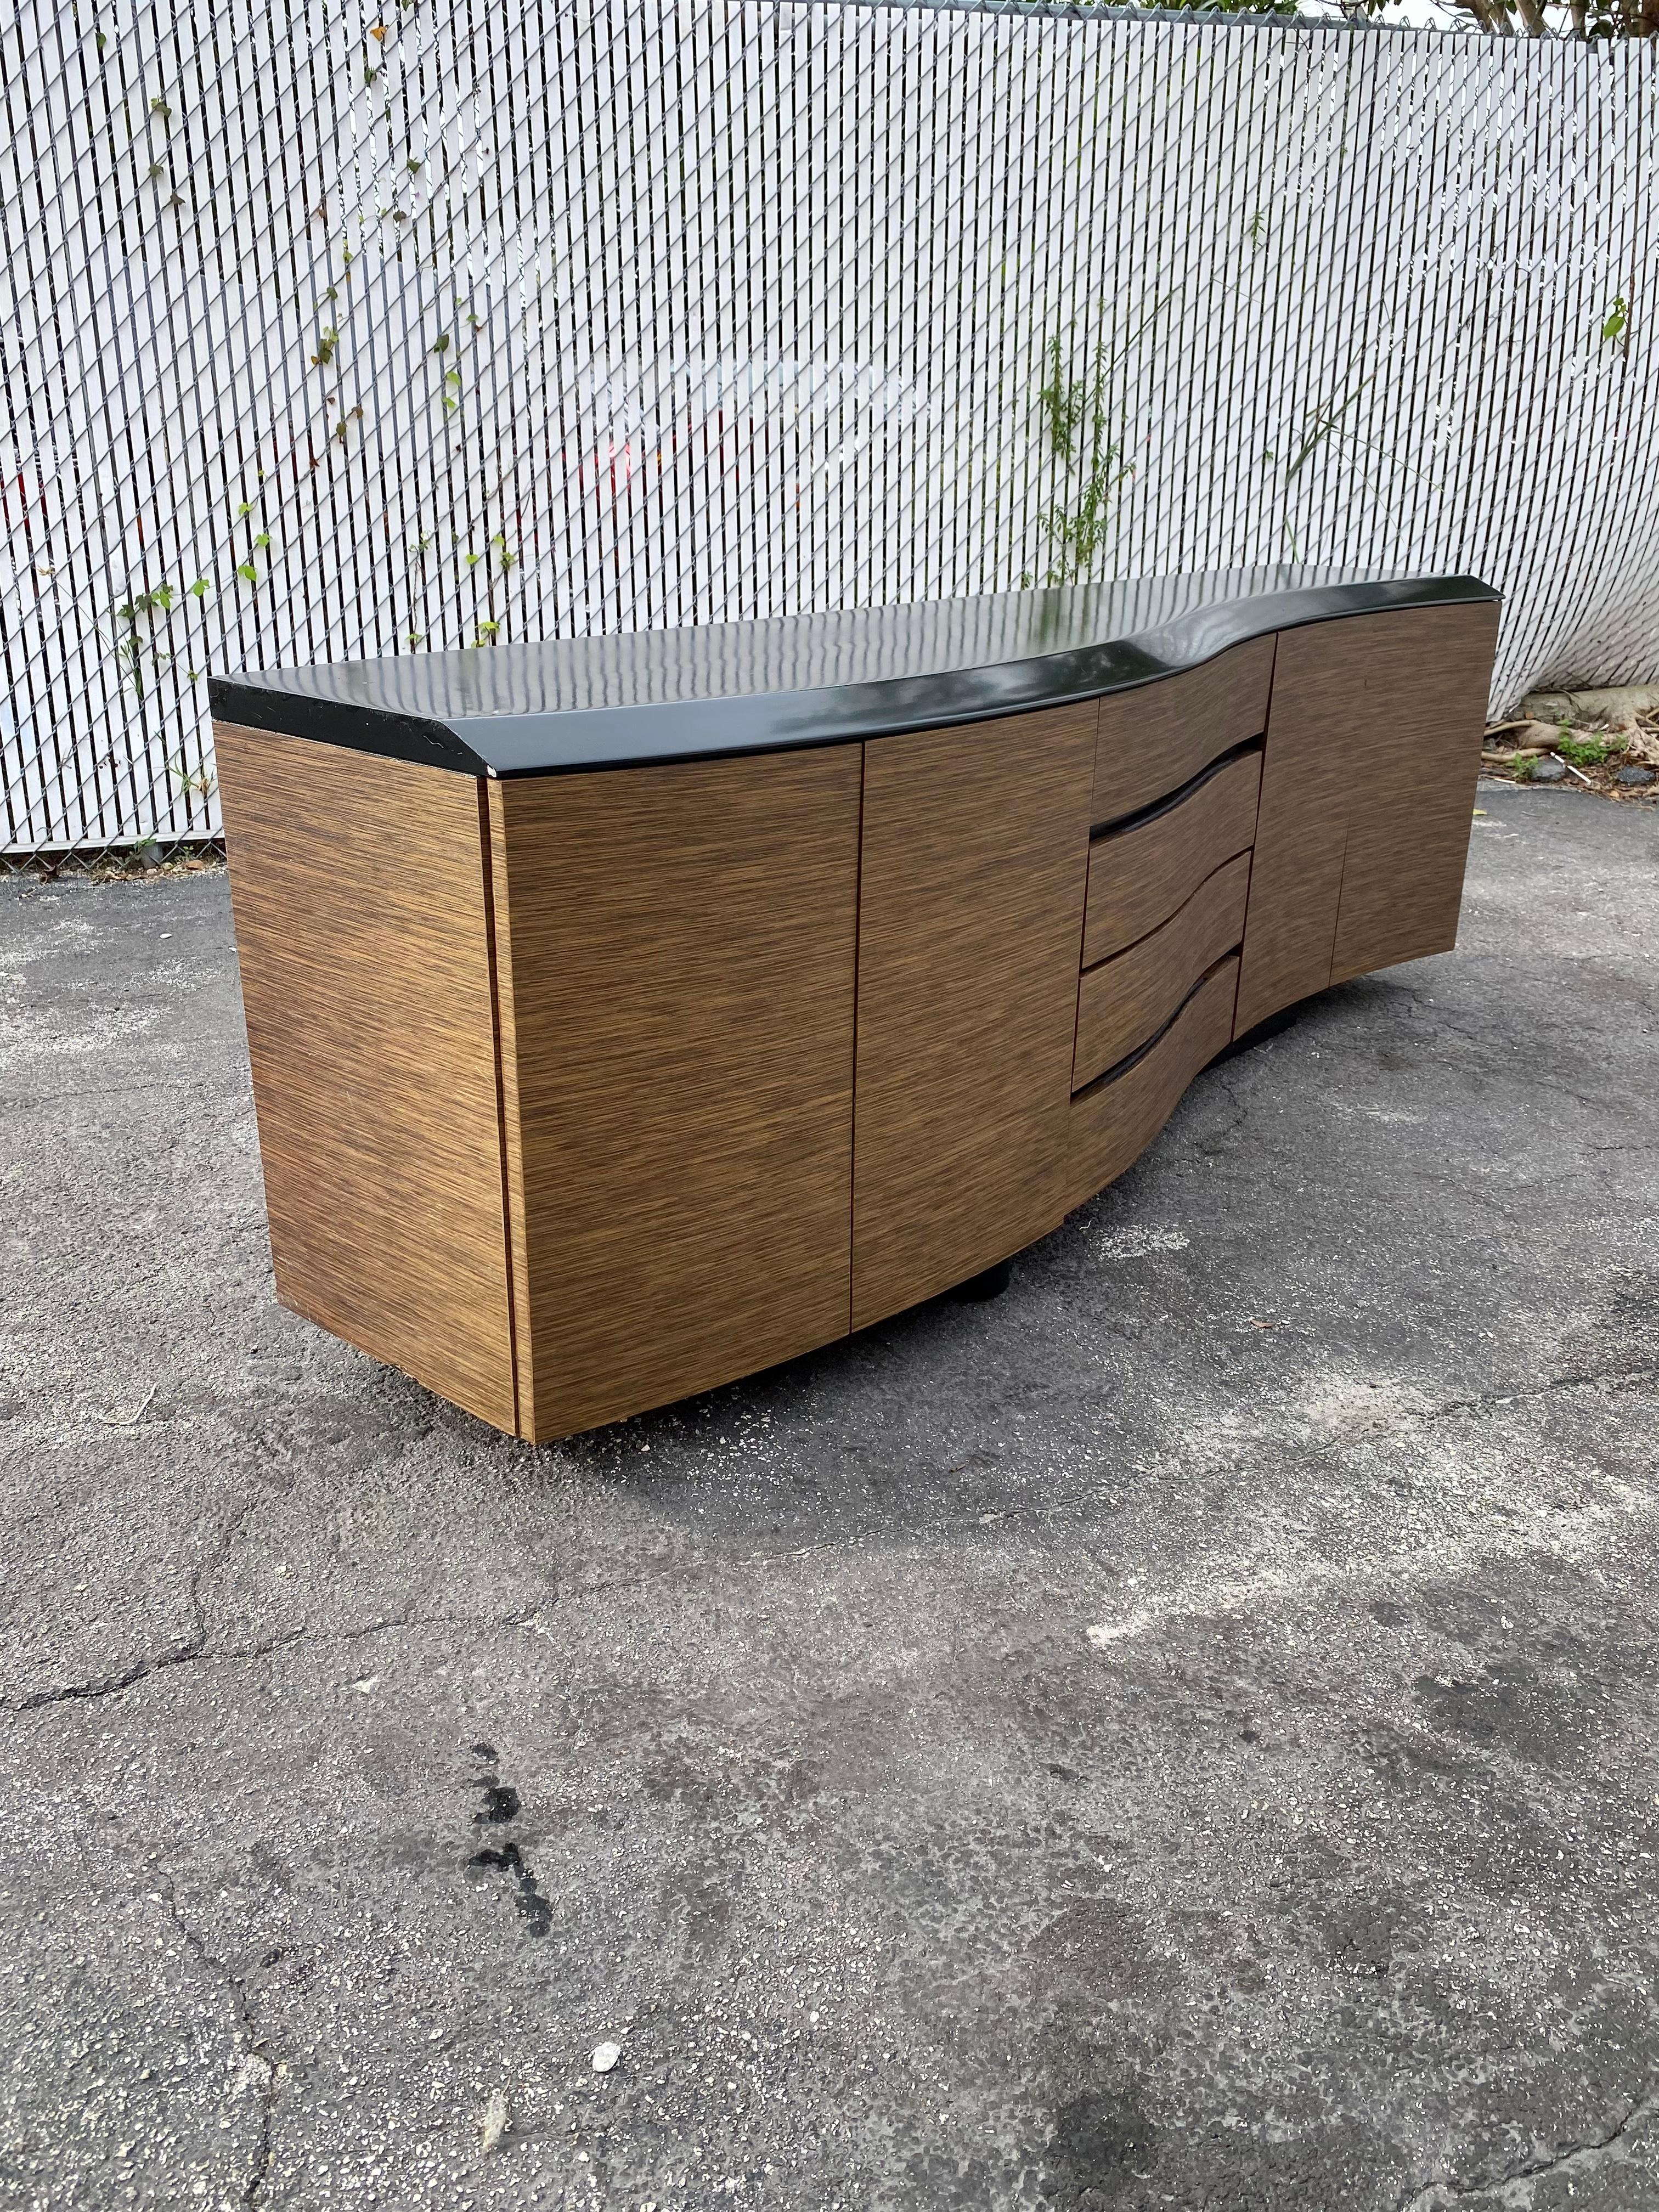 1970s Biomorphic Wood Waterfall Floating Credenza Sideboard  For Sale 2